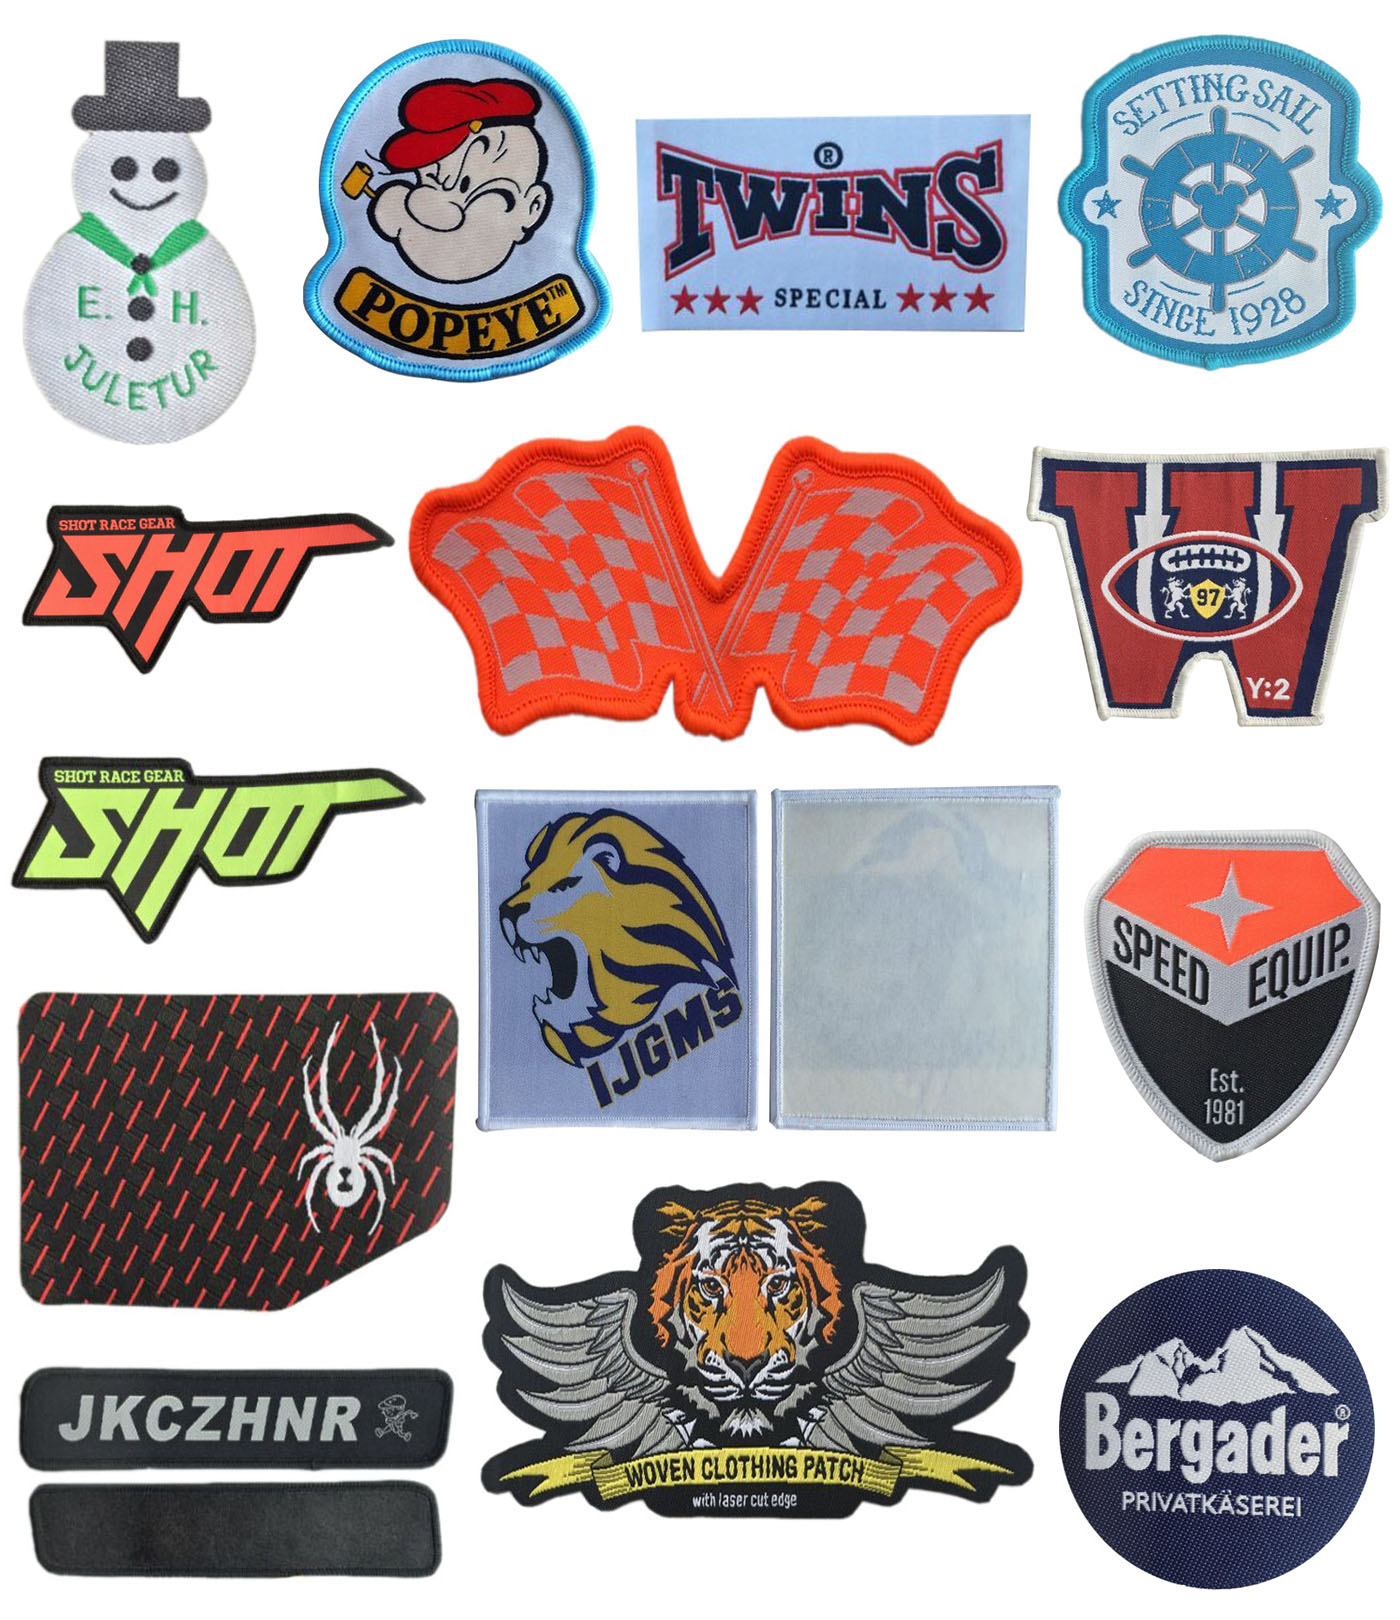 Woven logo patches 2